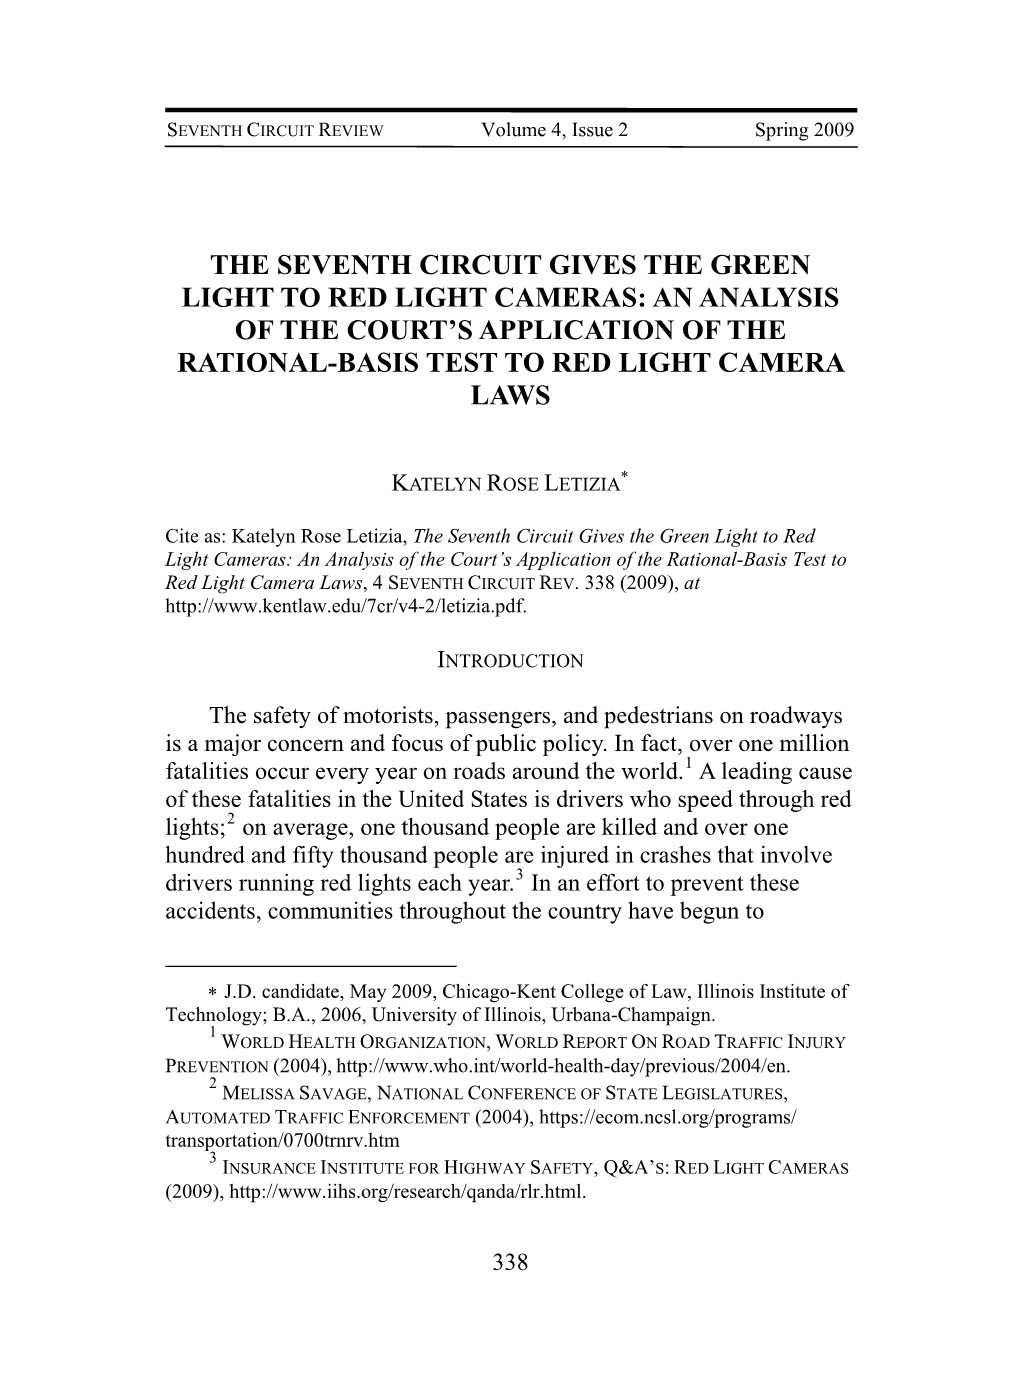 The Seventh Circuit Gives the Green Light to Red Light Cameras: an Analysis of the Court's Application of the Rational-Basis T